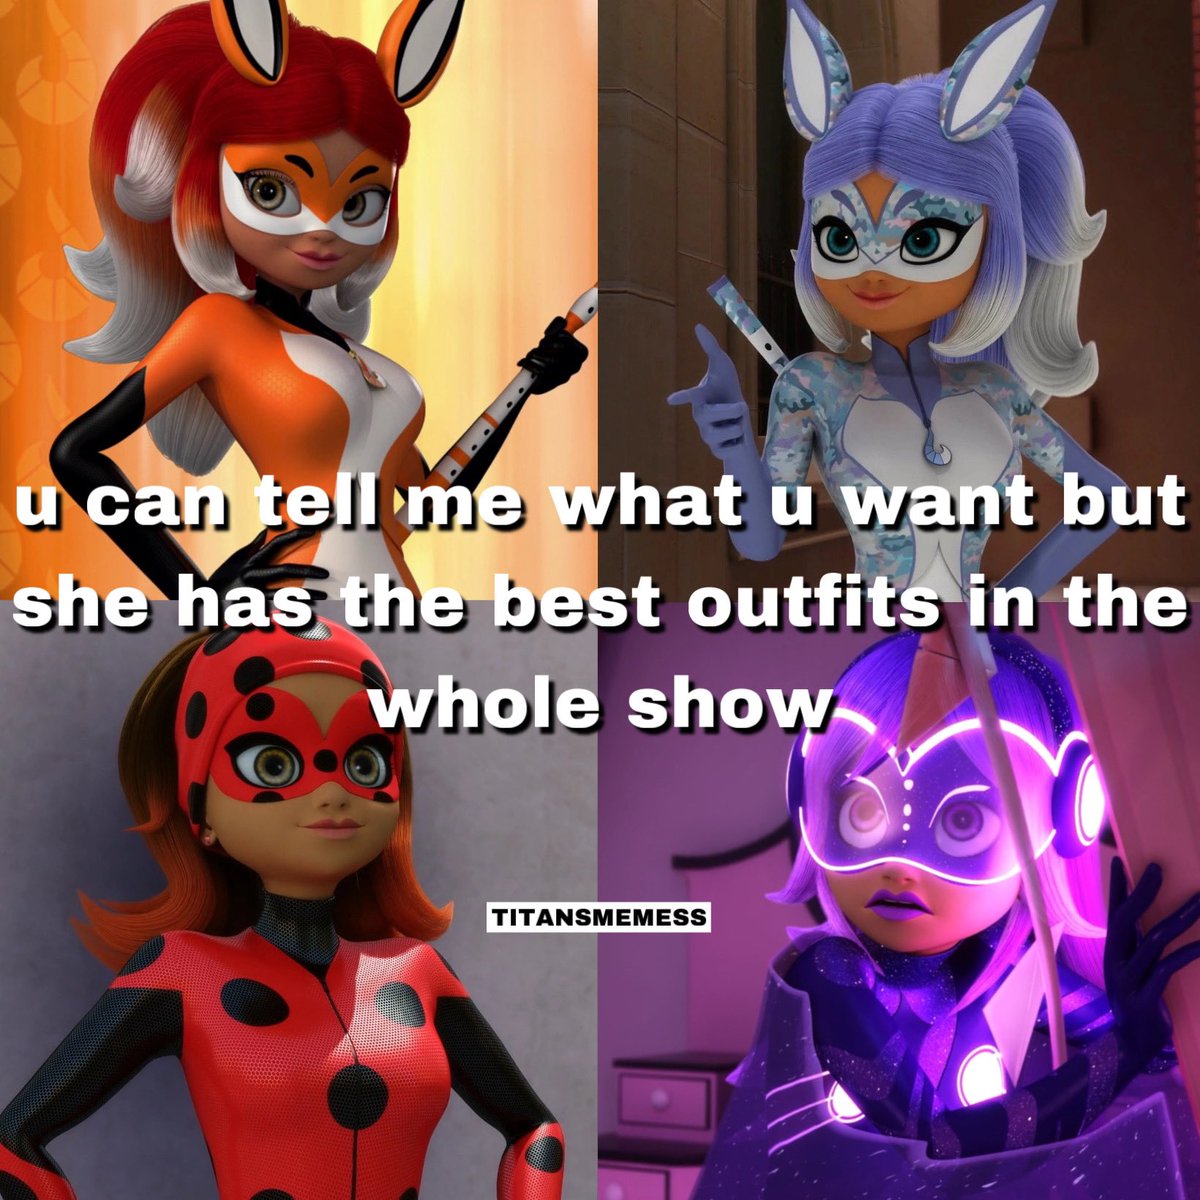 NO BUT FR? I MEAN LOOK AT HER #mlbtwt #mlb #miraclous #miraculousladybug #alyacesaire #trixx #renarouge #renafurtive #scarabella #ubiquity #fy #fyp #fypage #foryou #foryoupage